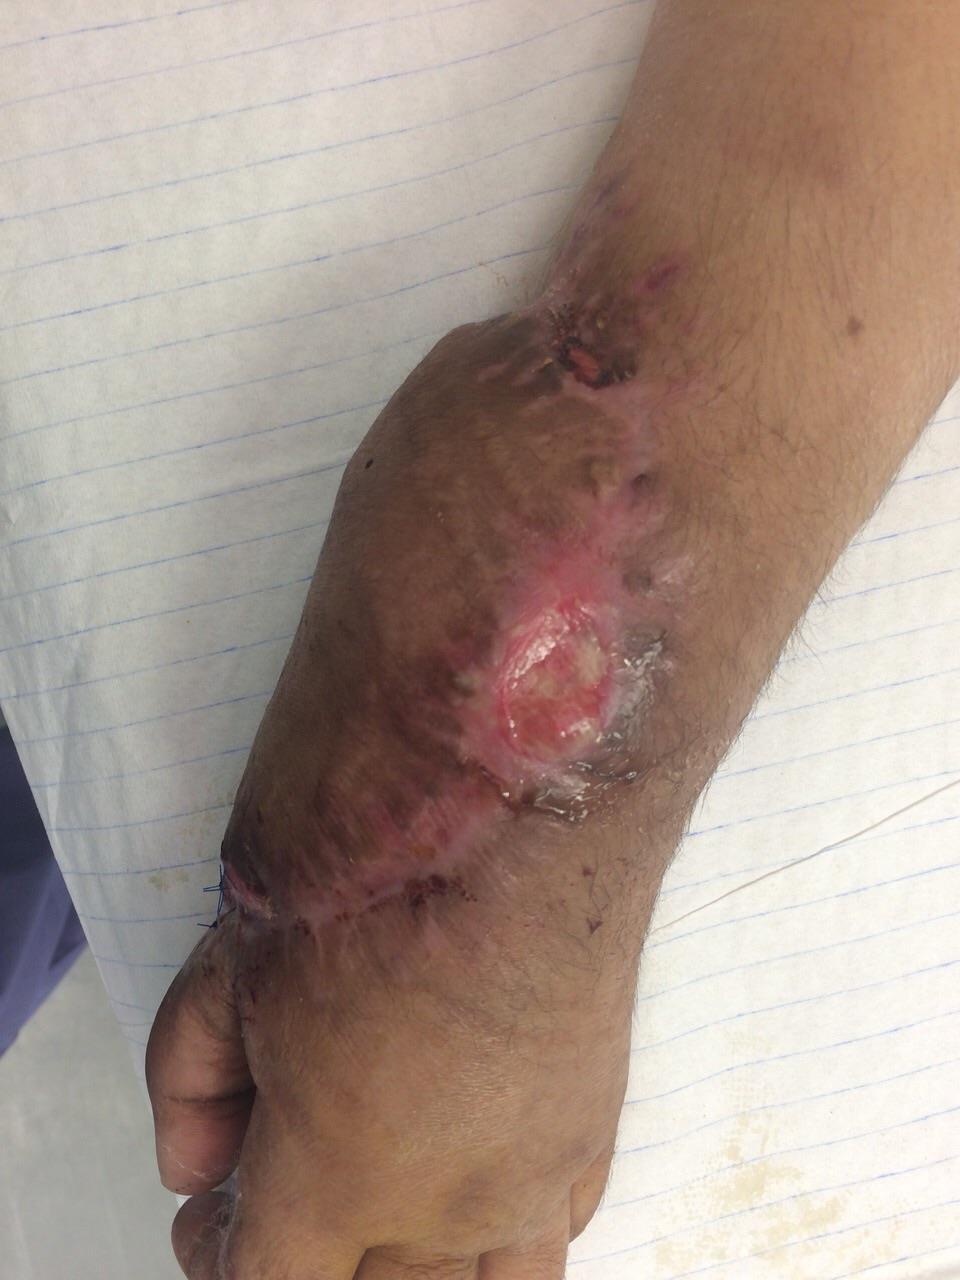 Case I 35-year-old female. RTA with comminuted fracture of left forearm.